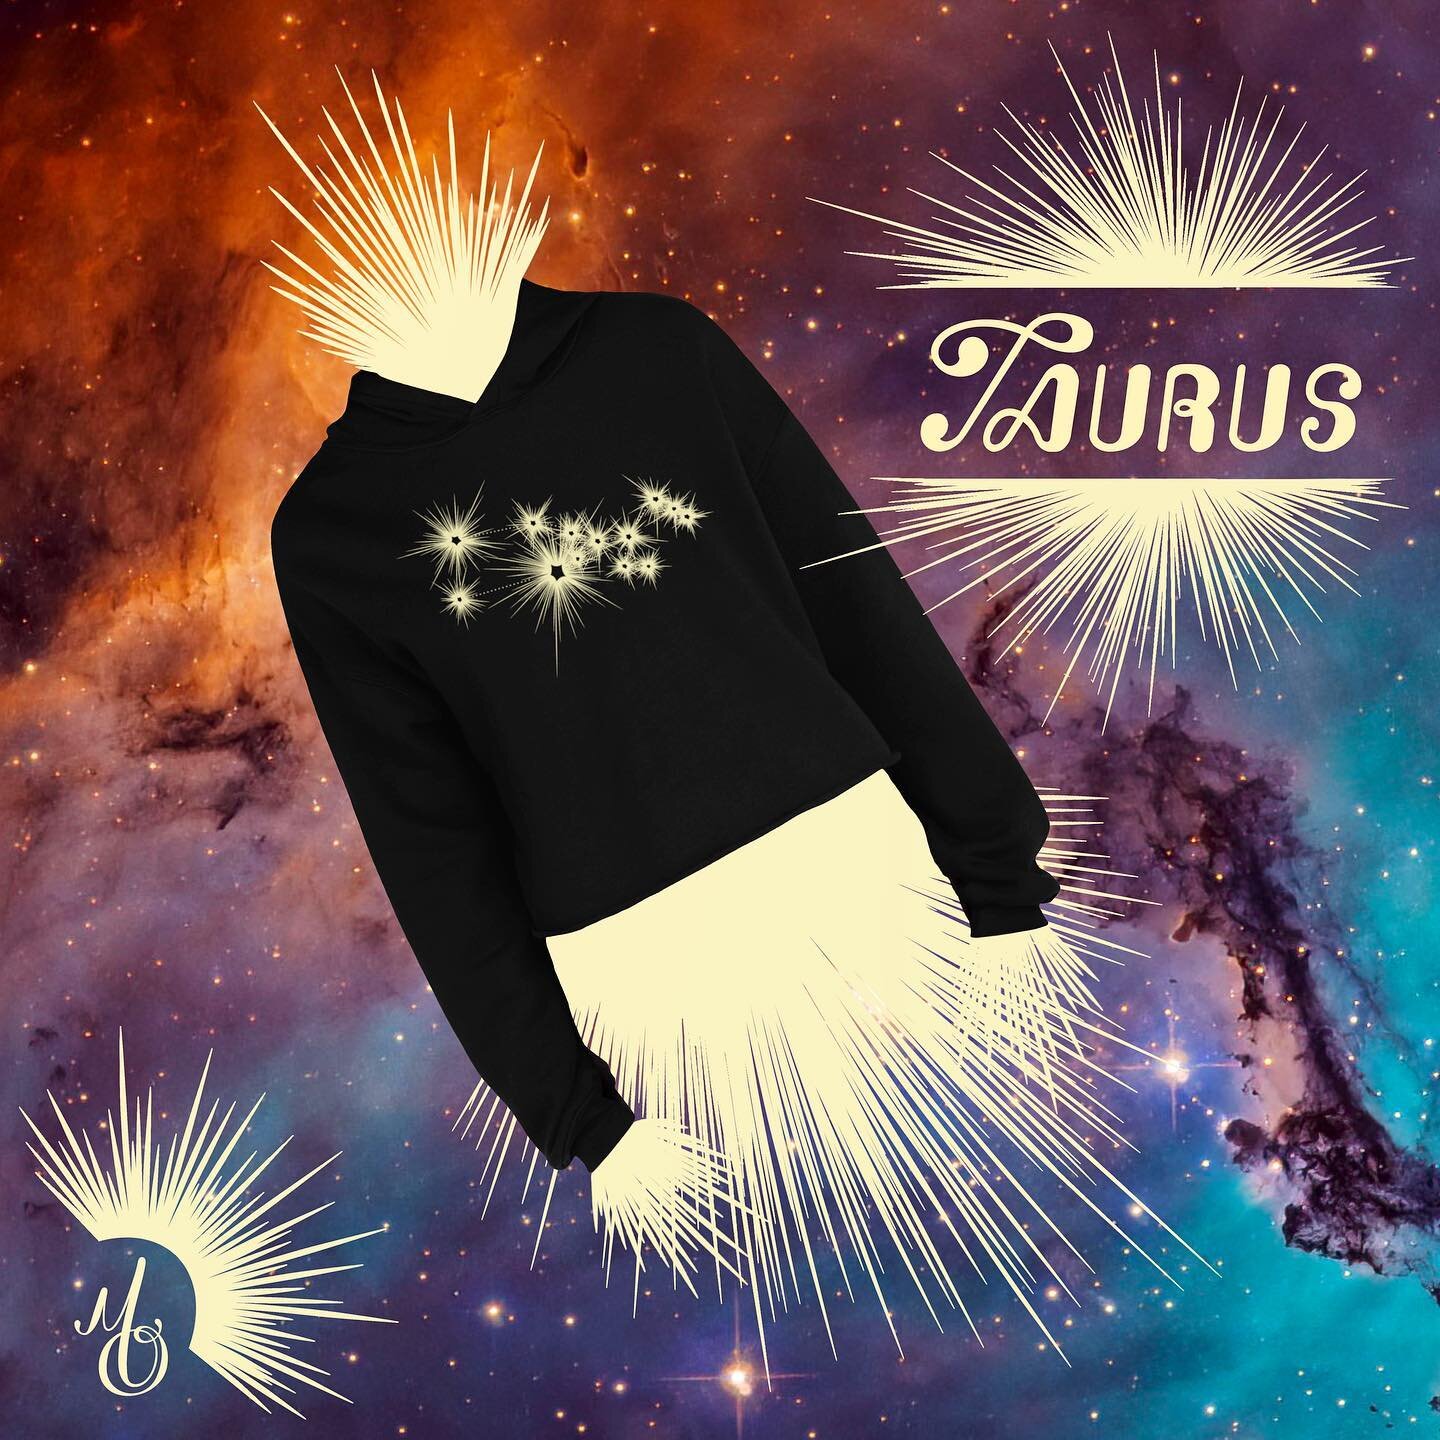 Alright Taurus babes, it&rsquo;s officially your season and your time to sparkle! So shine on like a shooting star with some new twinkly constellation goodies drawn with love especially for you! ✨🌟💫  ___  There are shirts, sweatshirts, hoodies, CRO